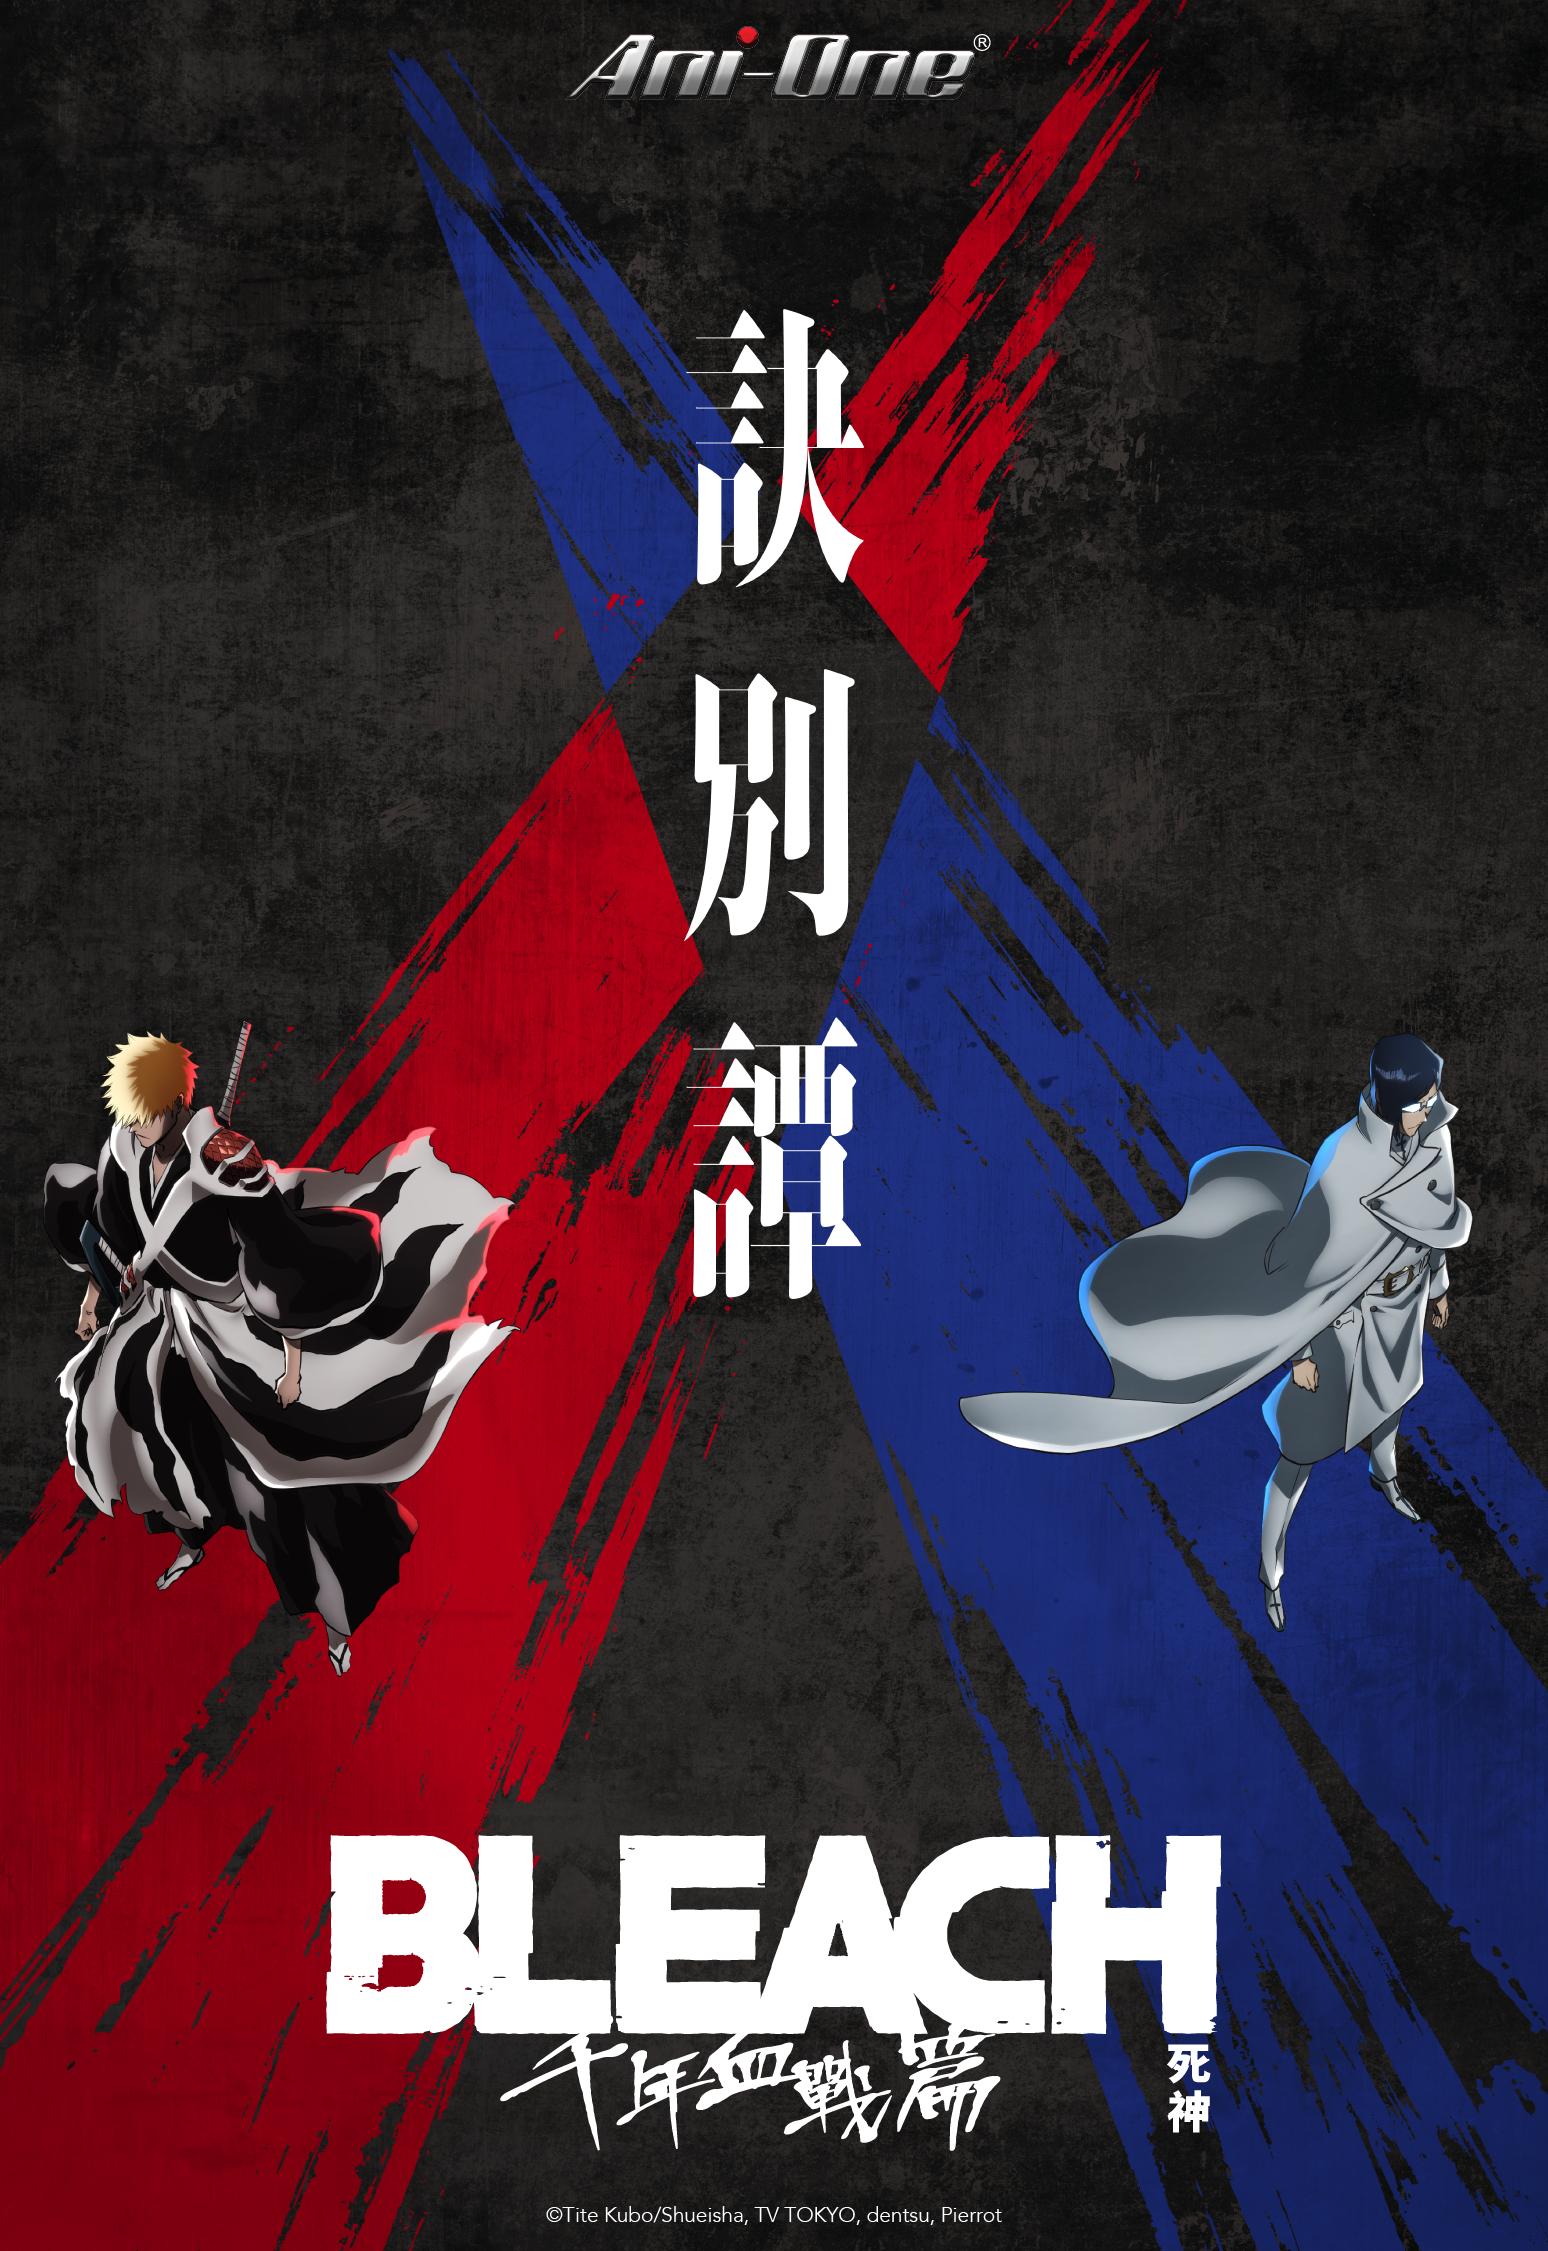 91 days left. Cursed Bleach pictures daily till Anime returns. : r